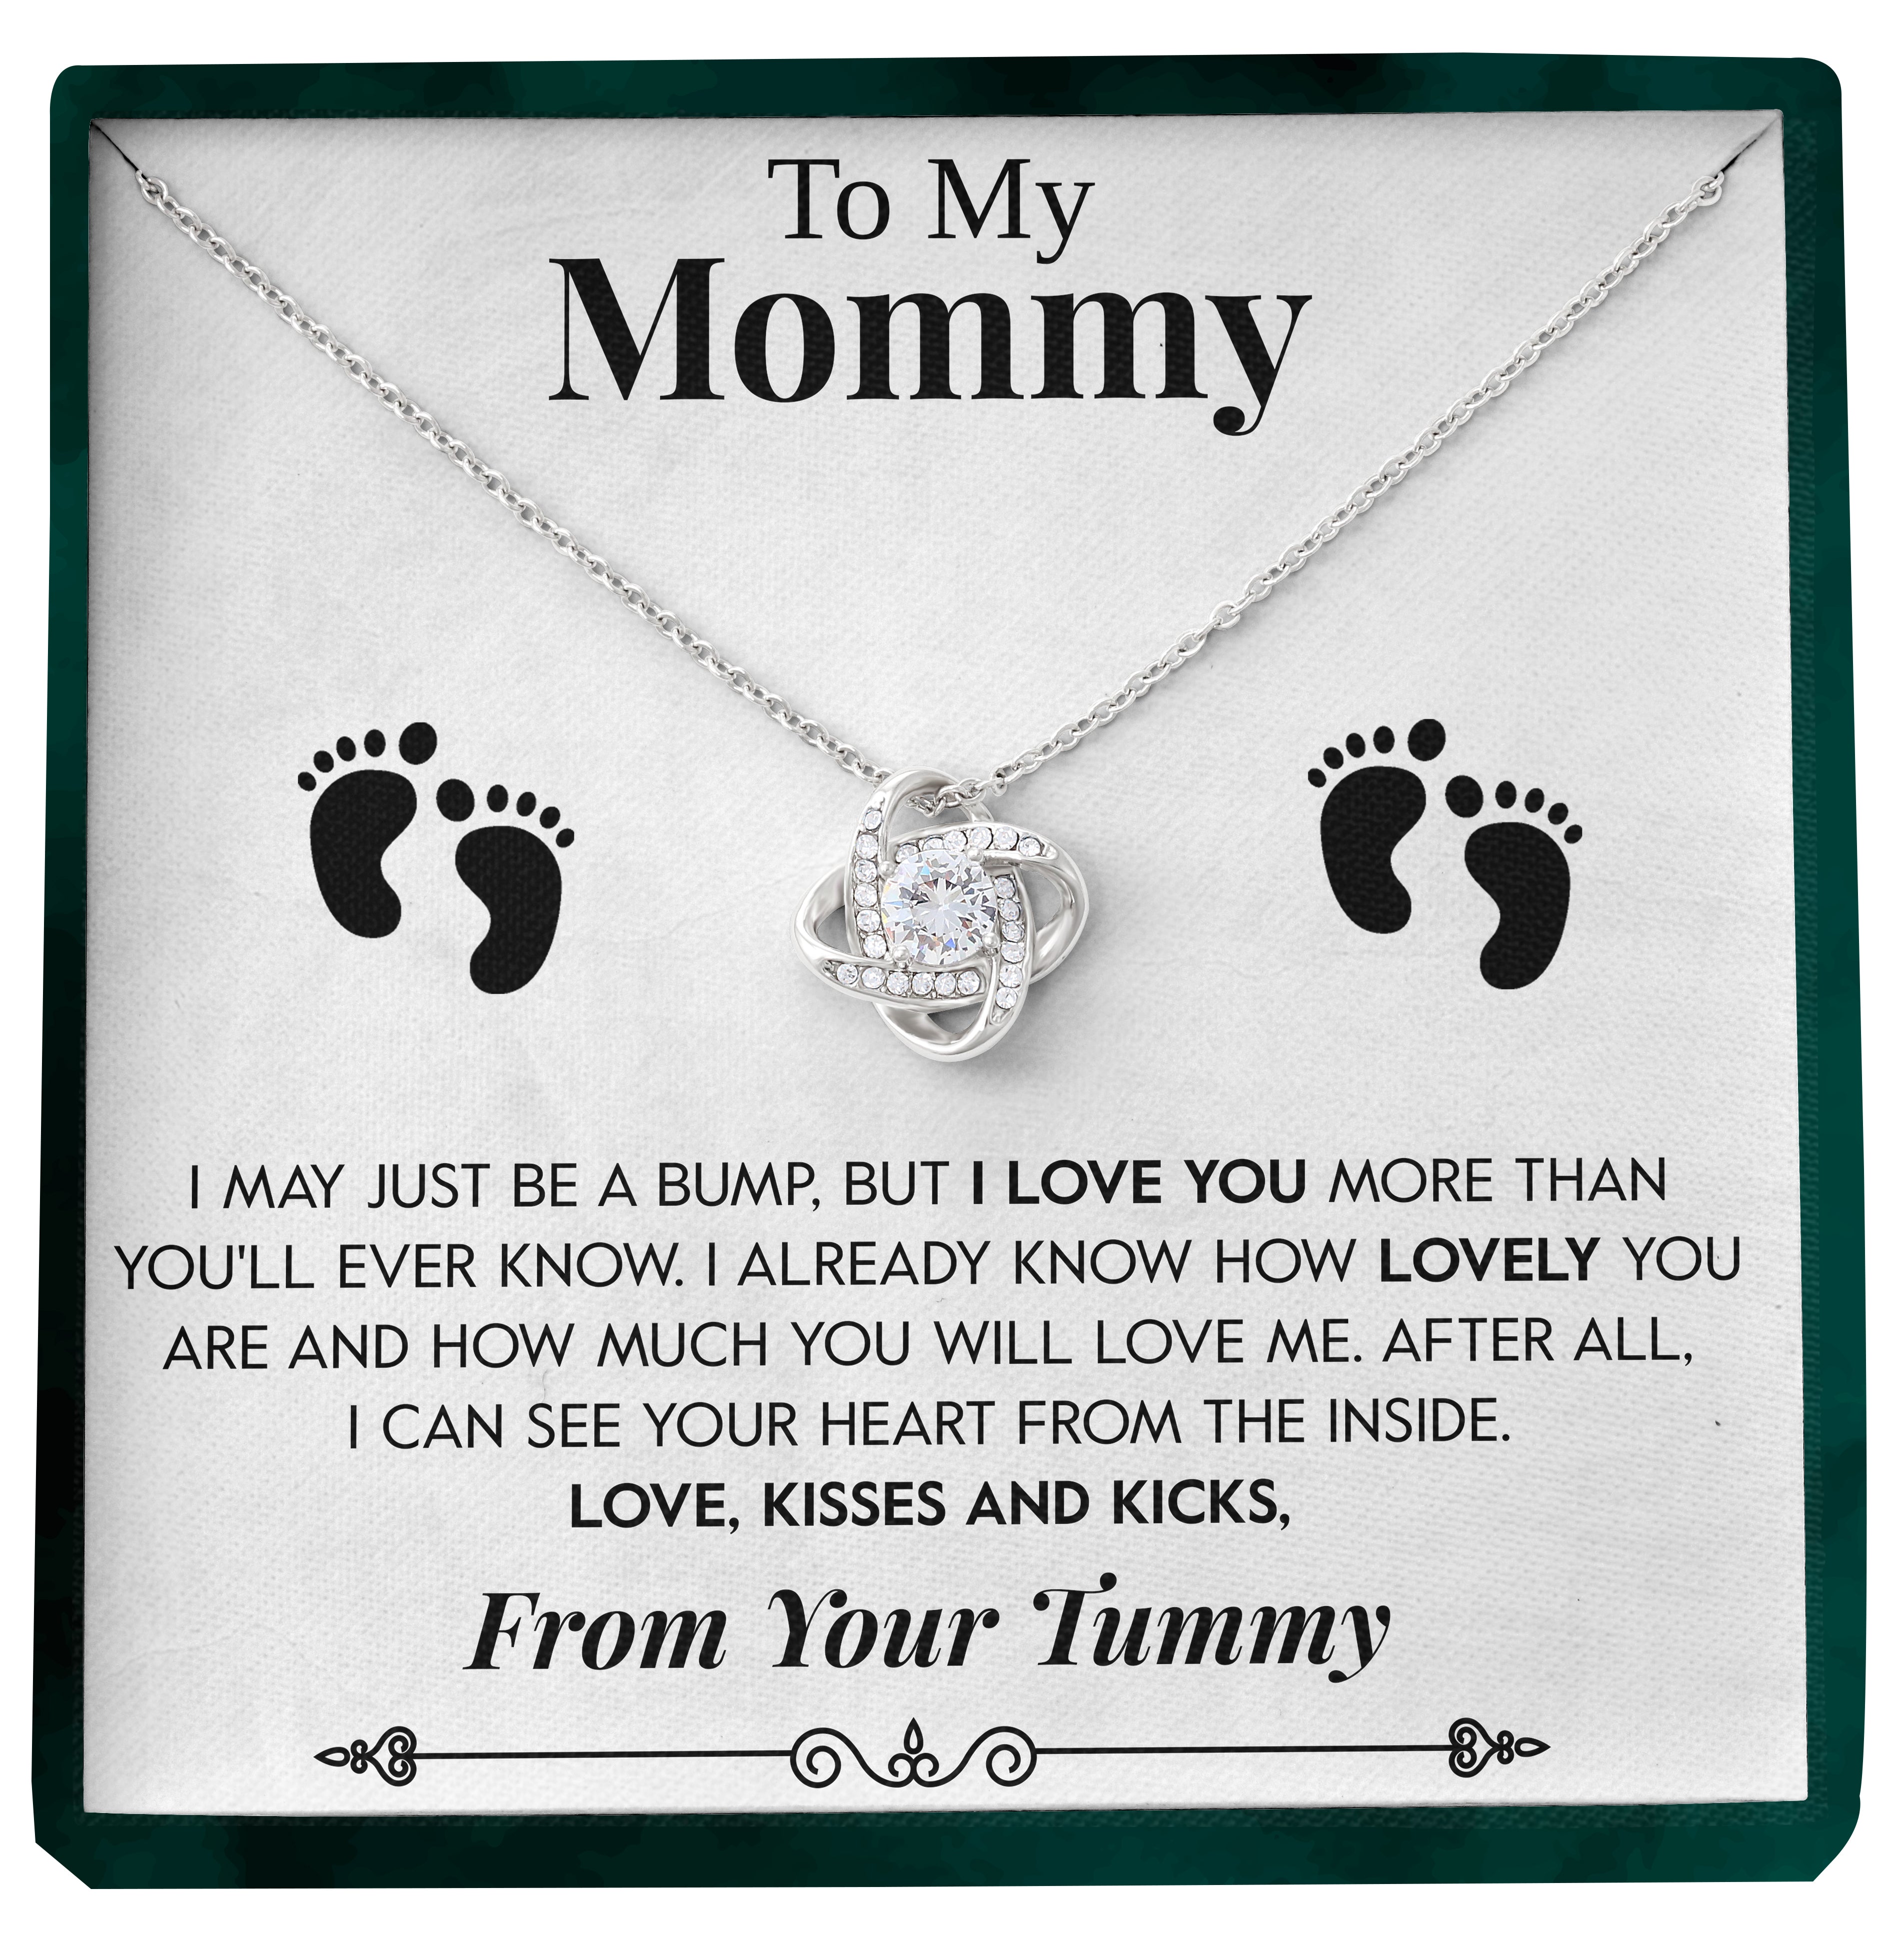 To My Mommy | "Love Kisses and Kicks" | Love Knot Necklace